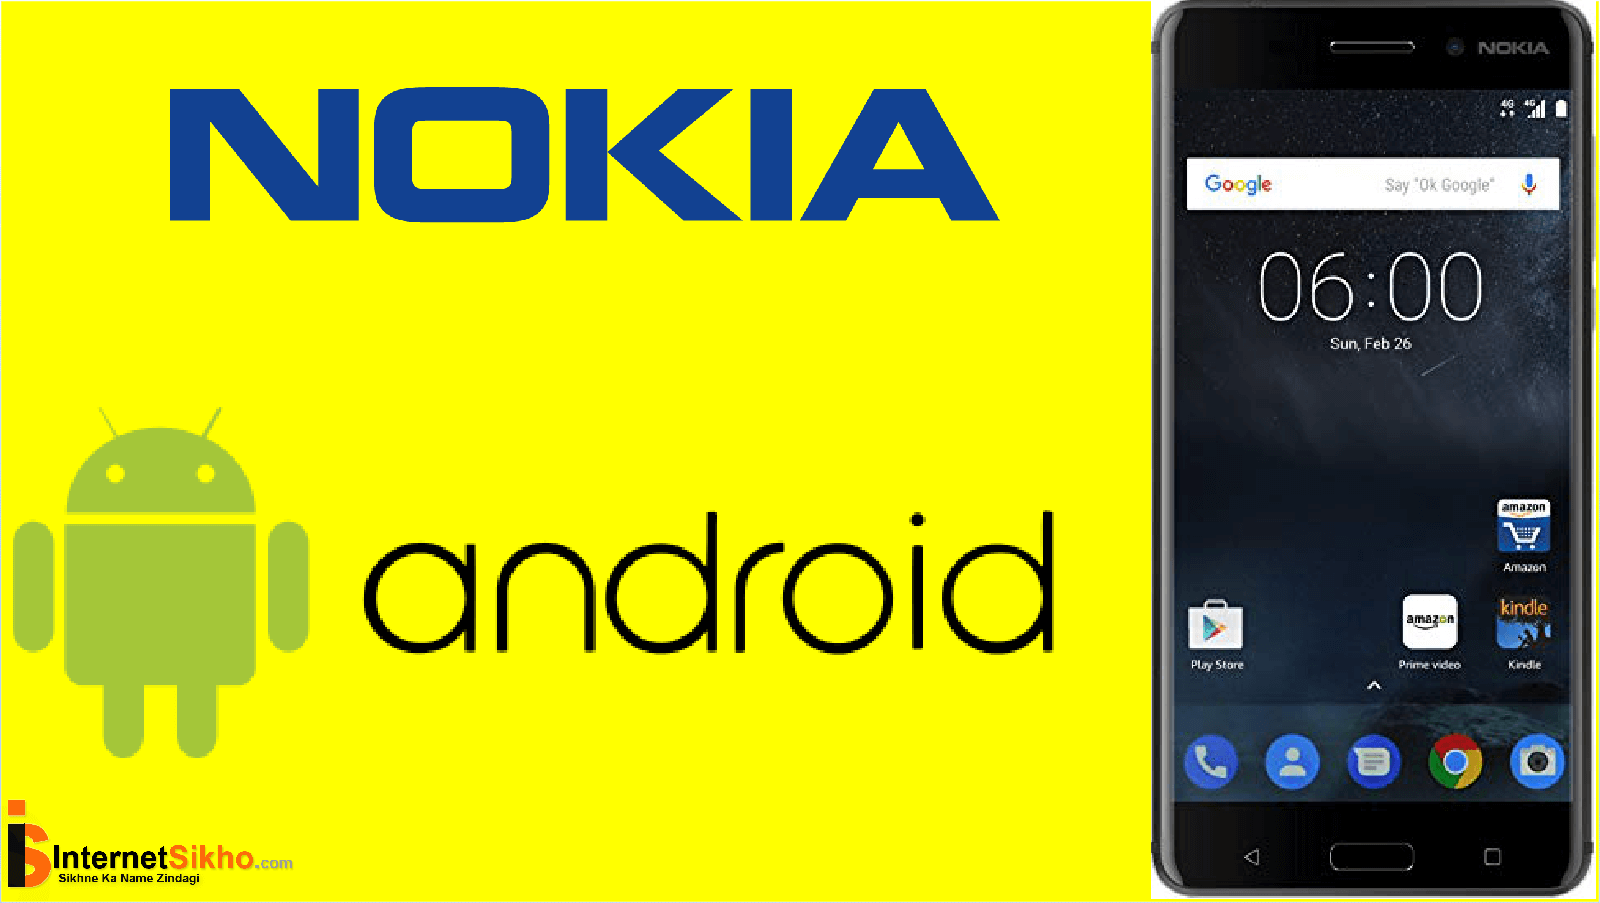 NOKIA NEW ANDROID PHONE 2017